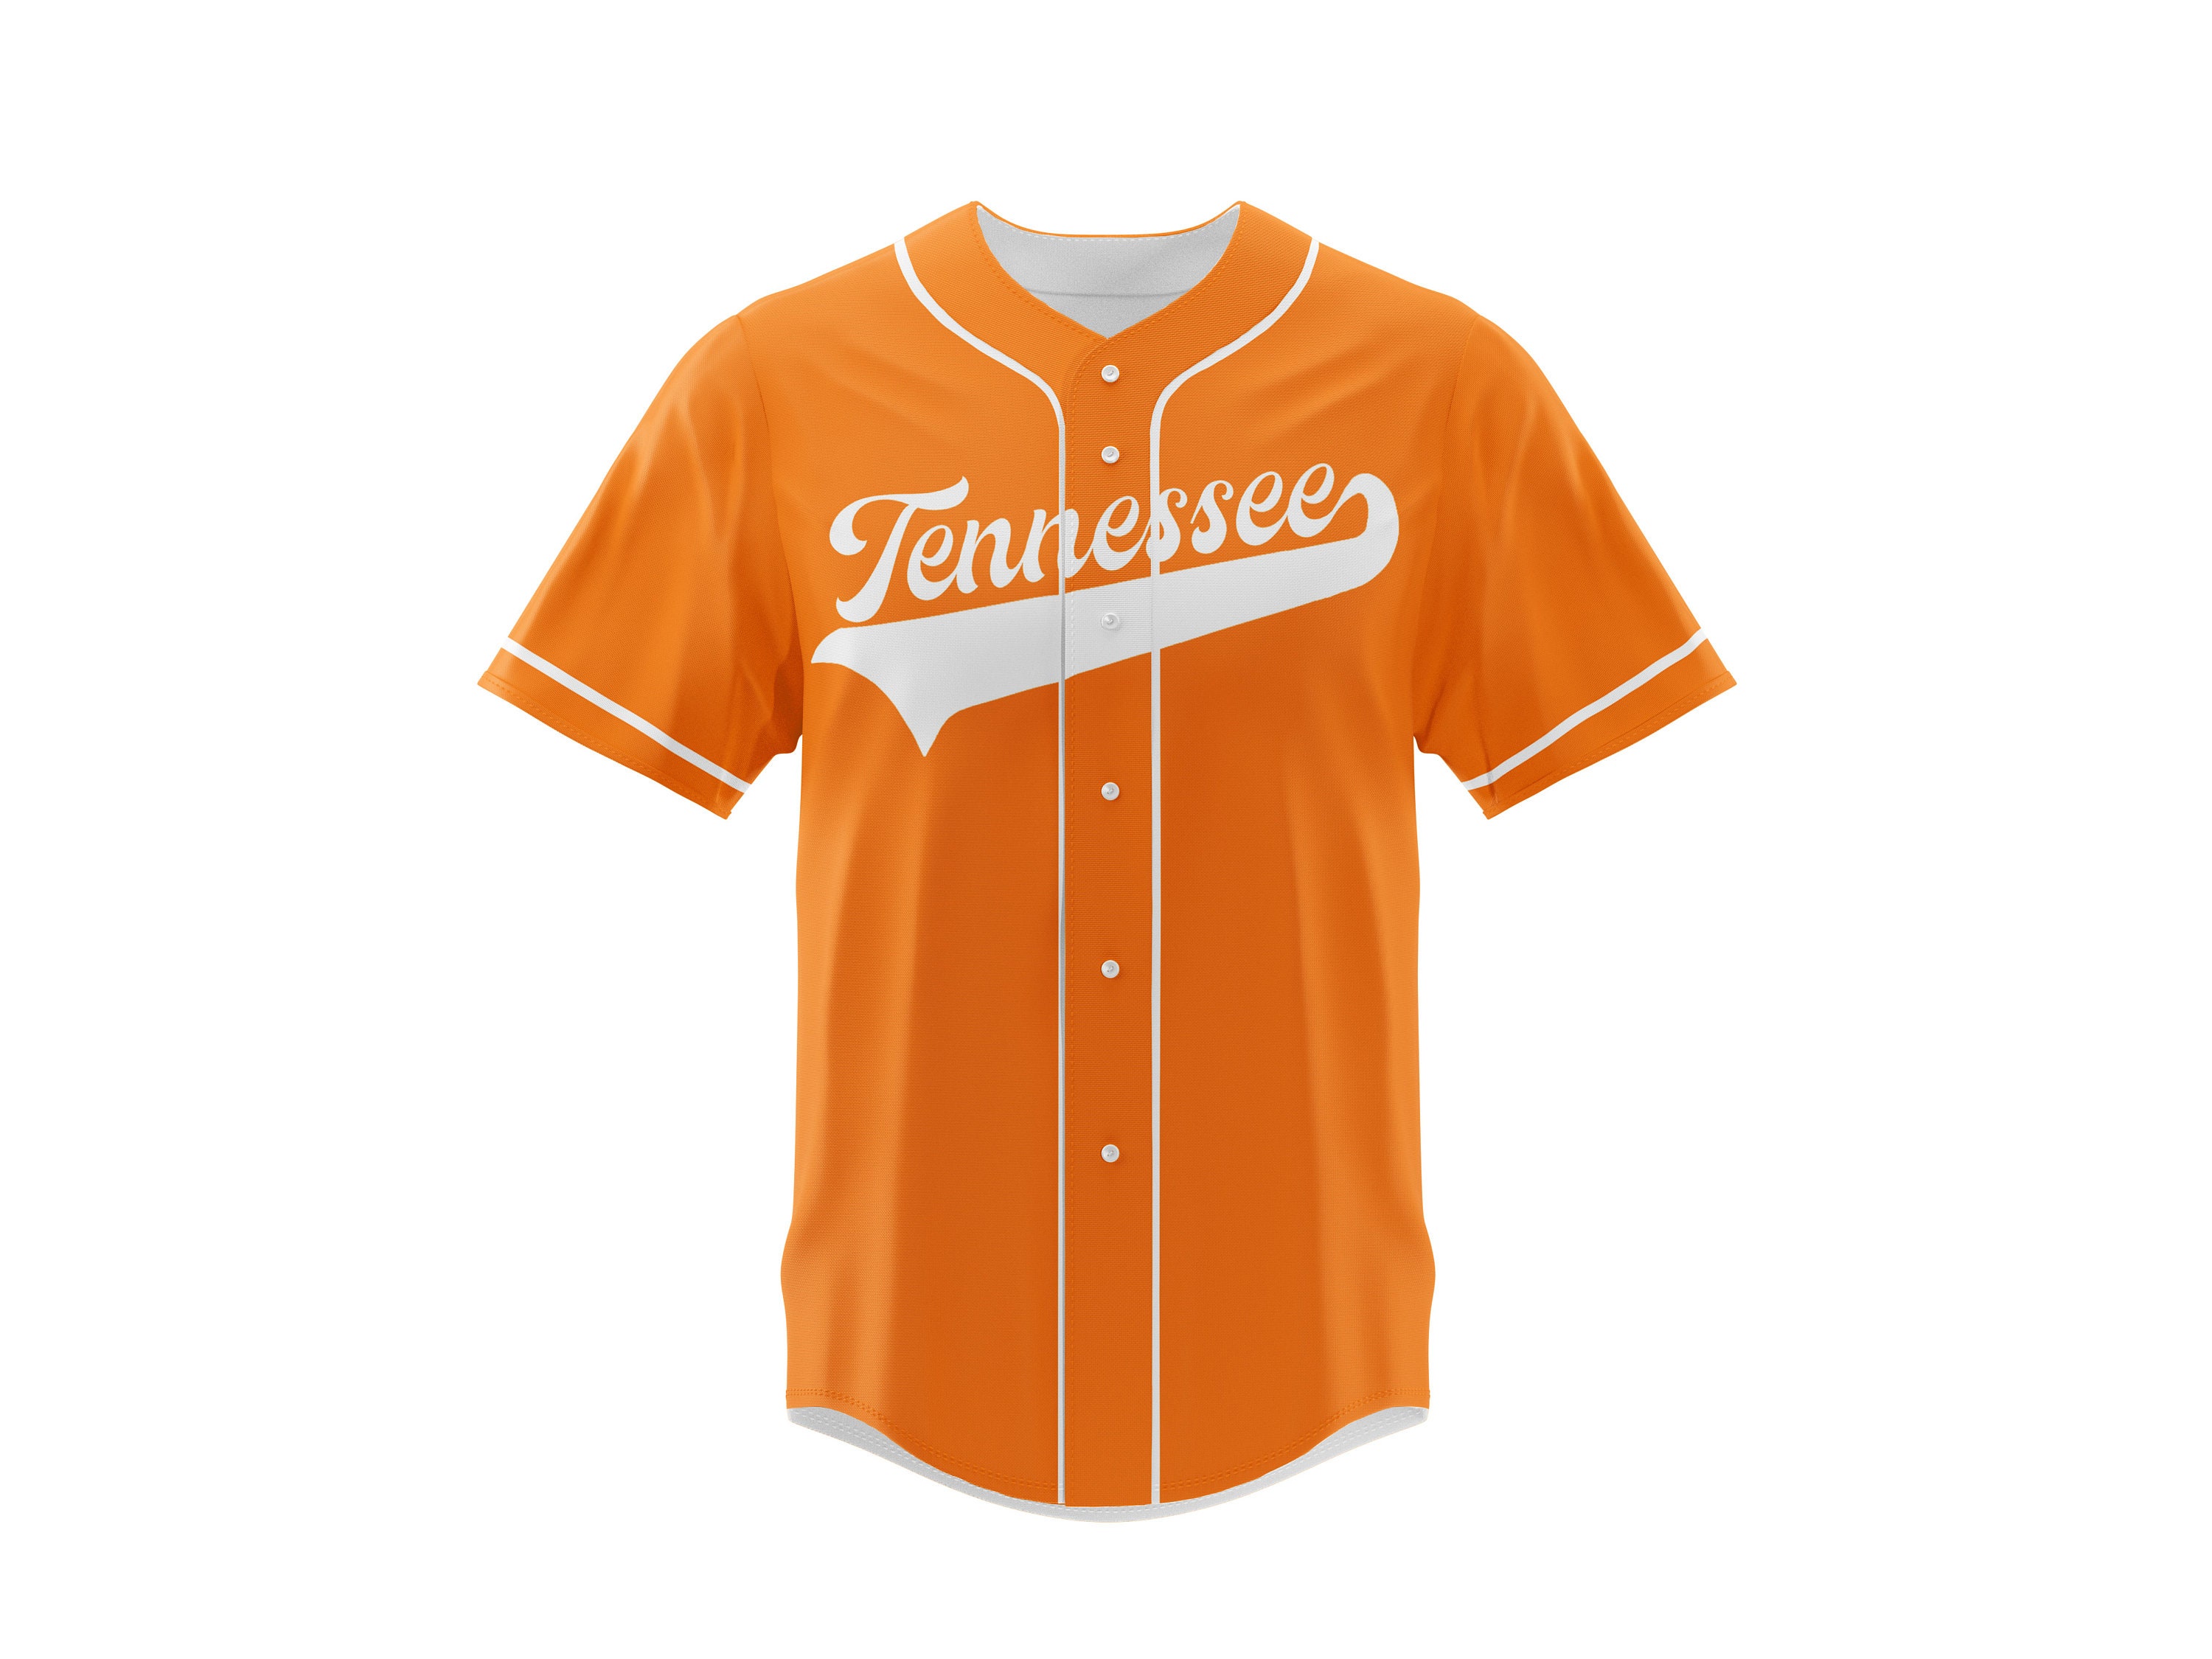 Buy Tennessee Collegiate Baseball Jersey Fully Customizable Online